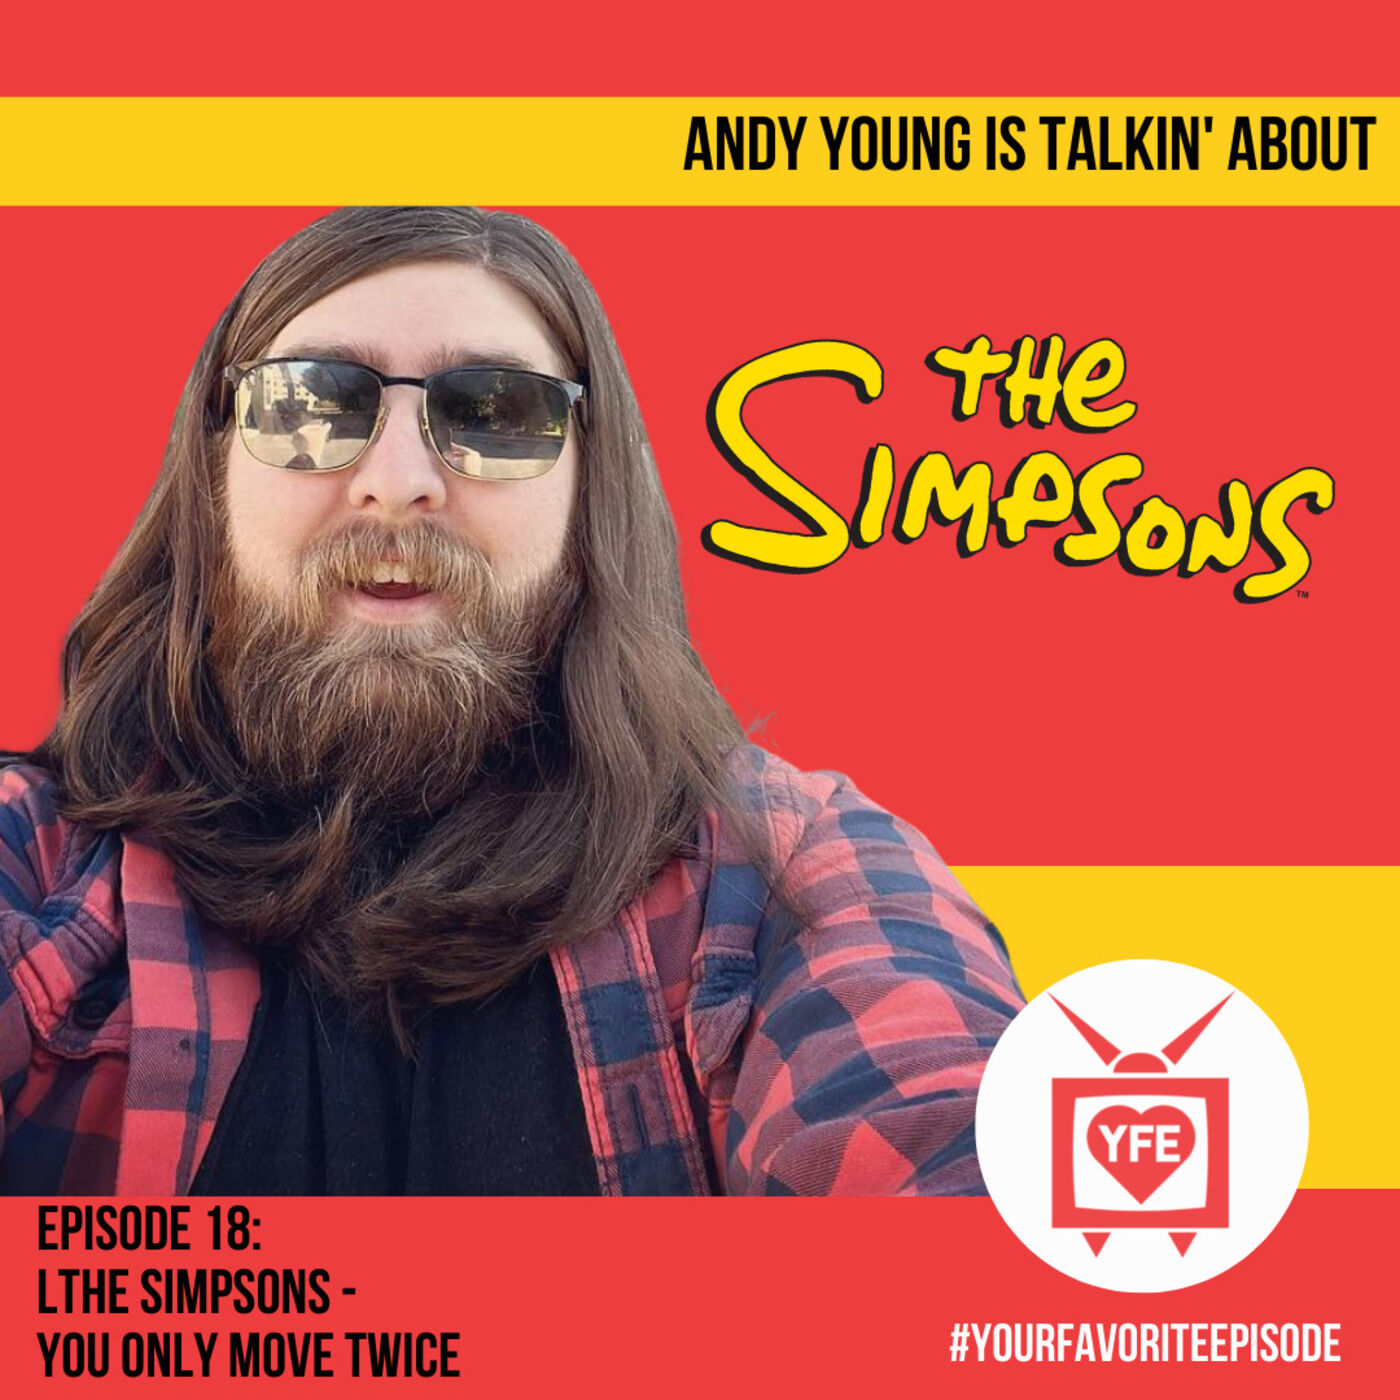 "The Simpsons"- You Only Move Twice with Andy Young